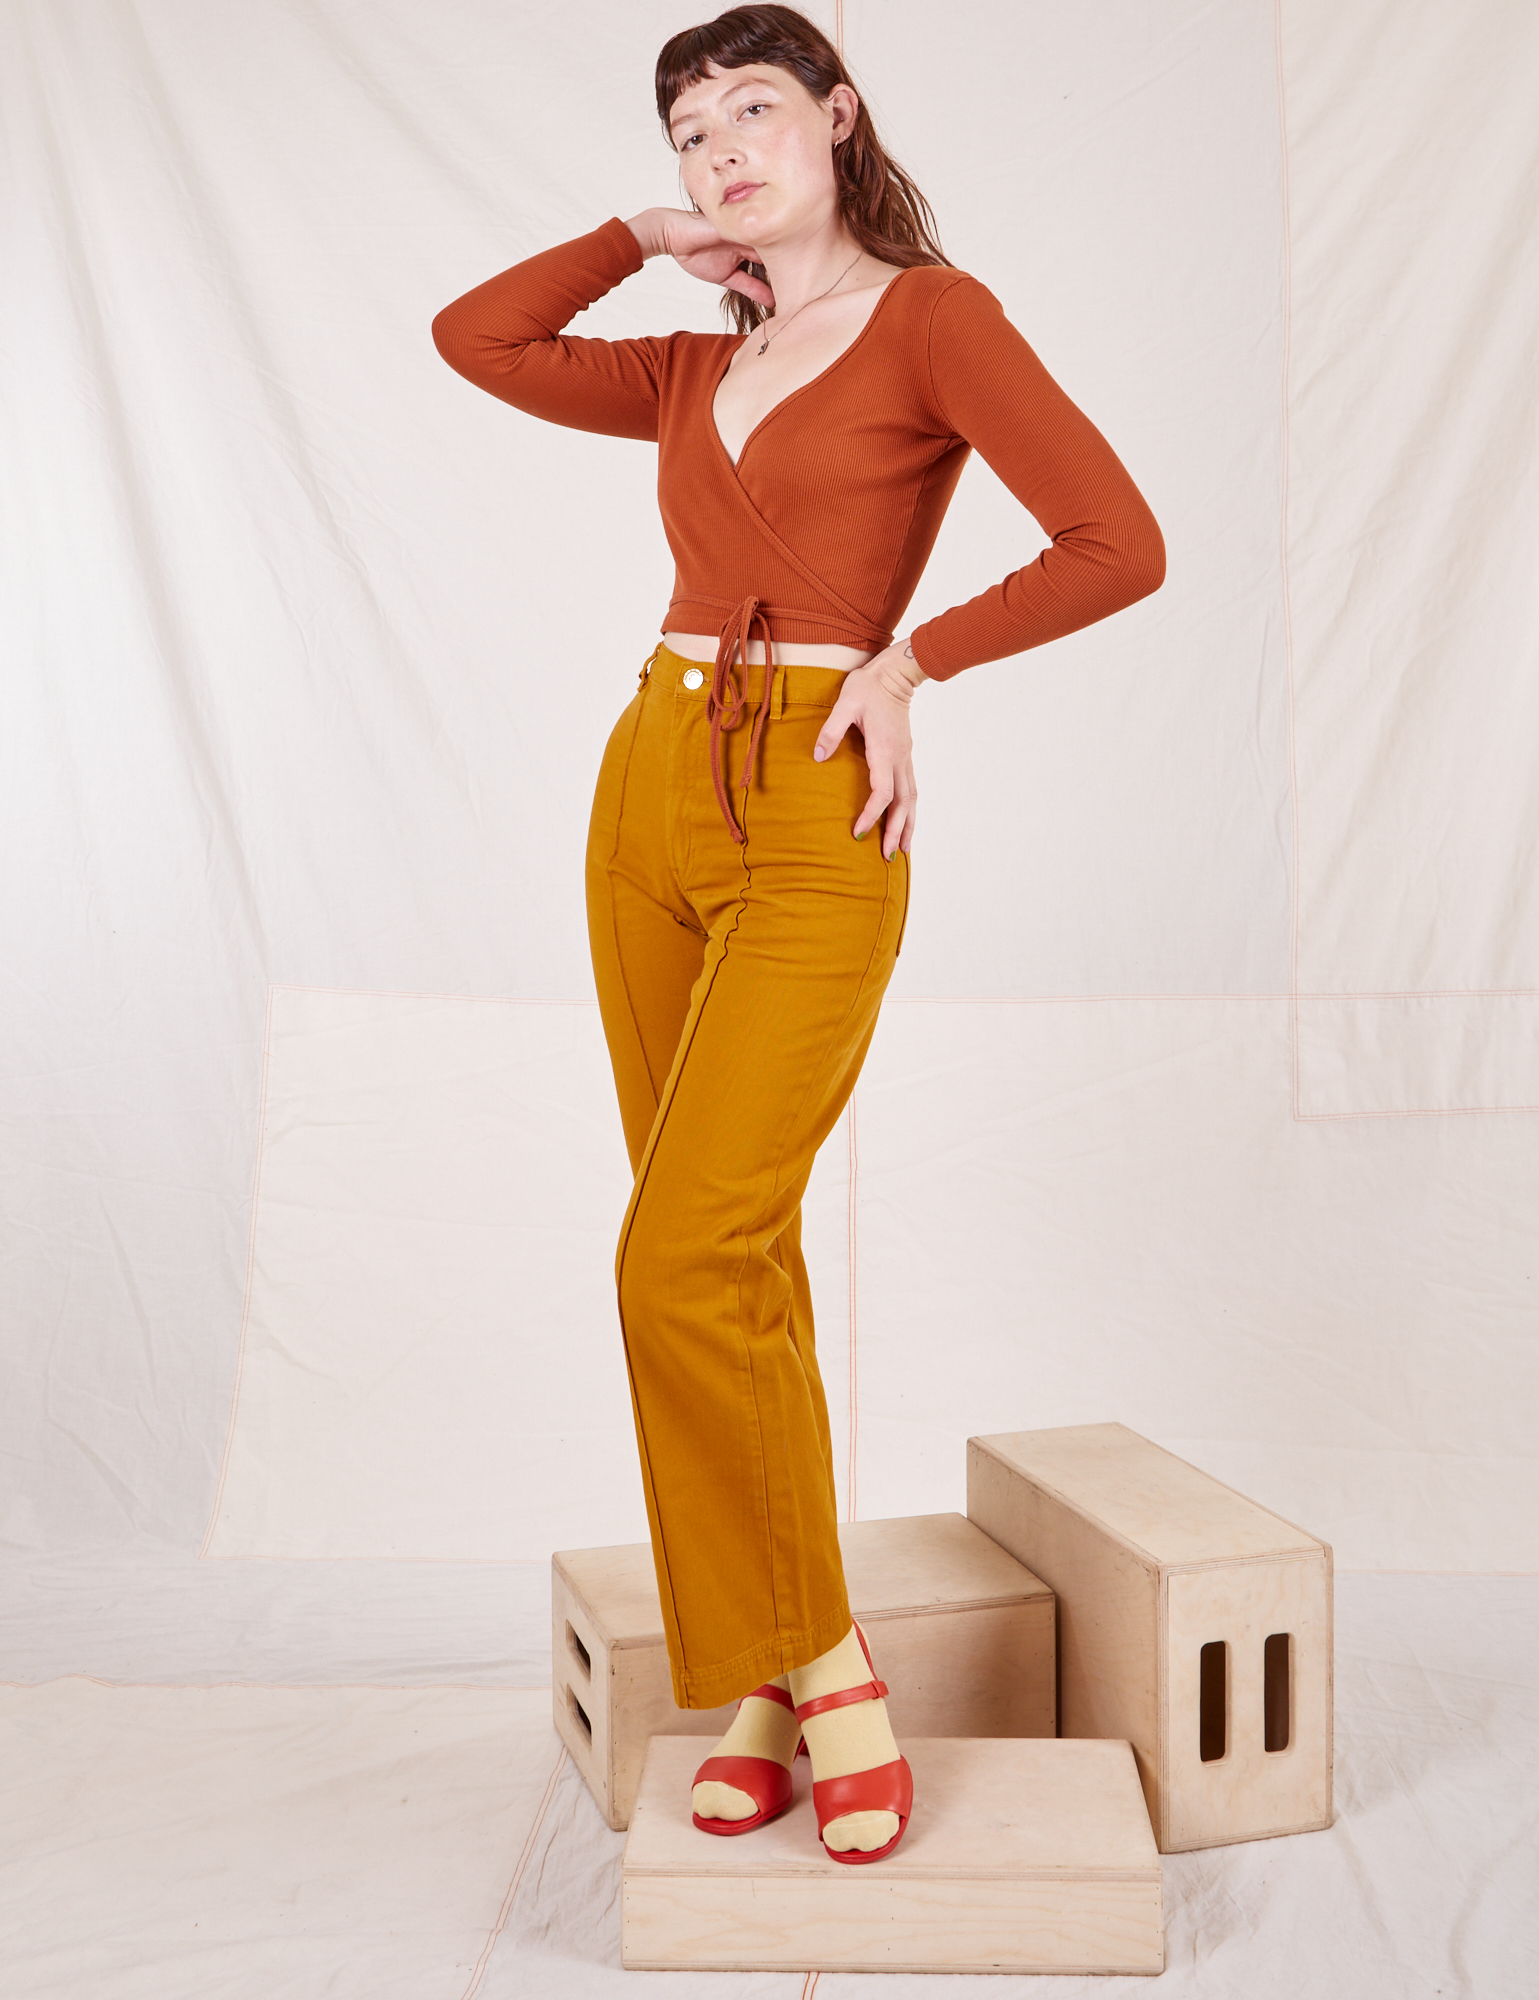 Alex is wearing Wrap Top in Burnt Terracotta and spicy mustard Western Pants